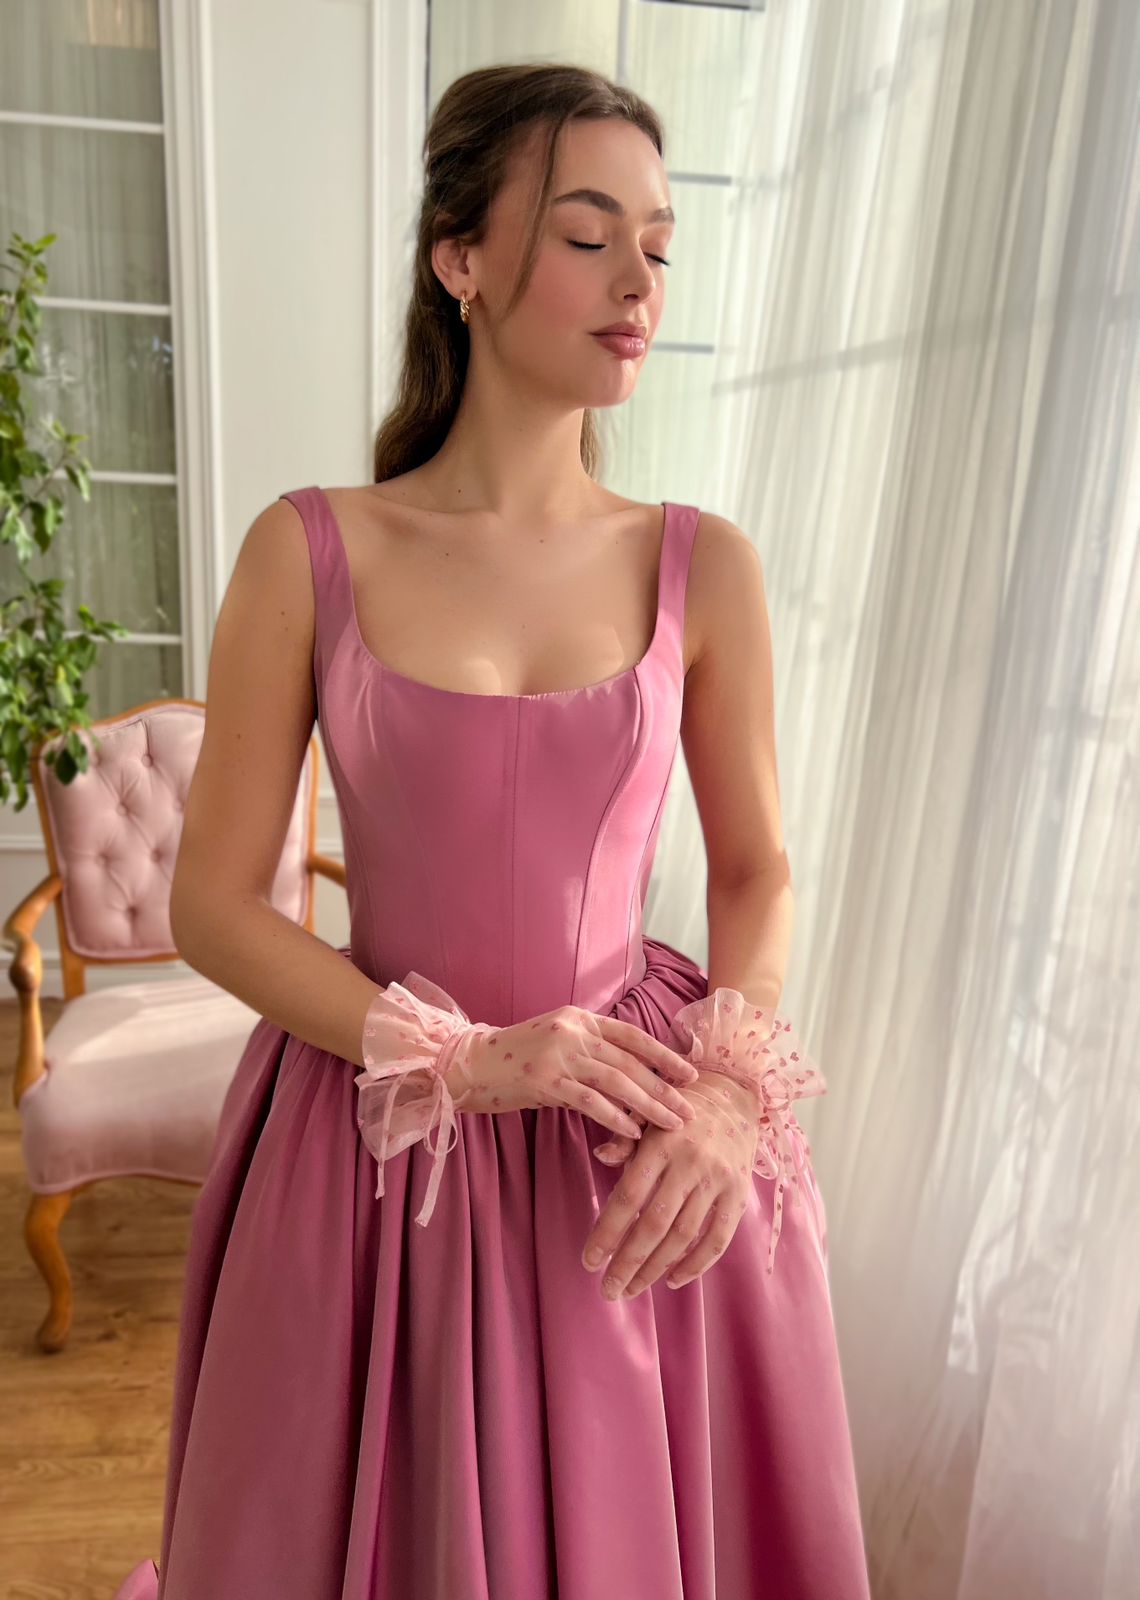 Pink A-Line dress with straps made from taffeta fabric